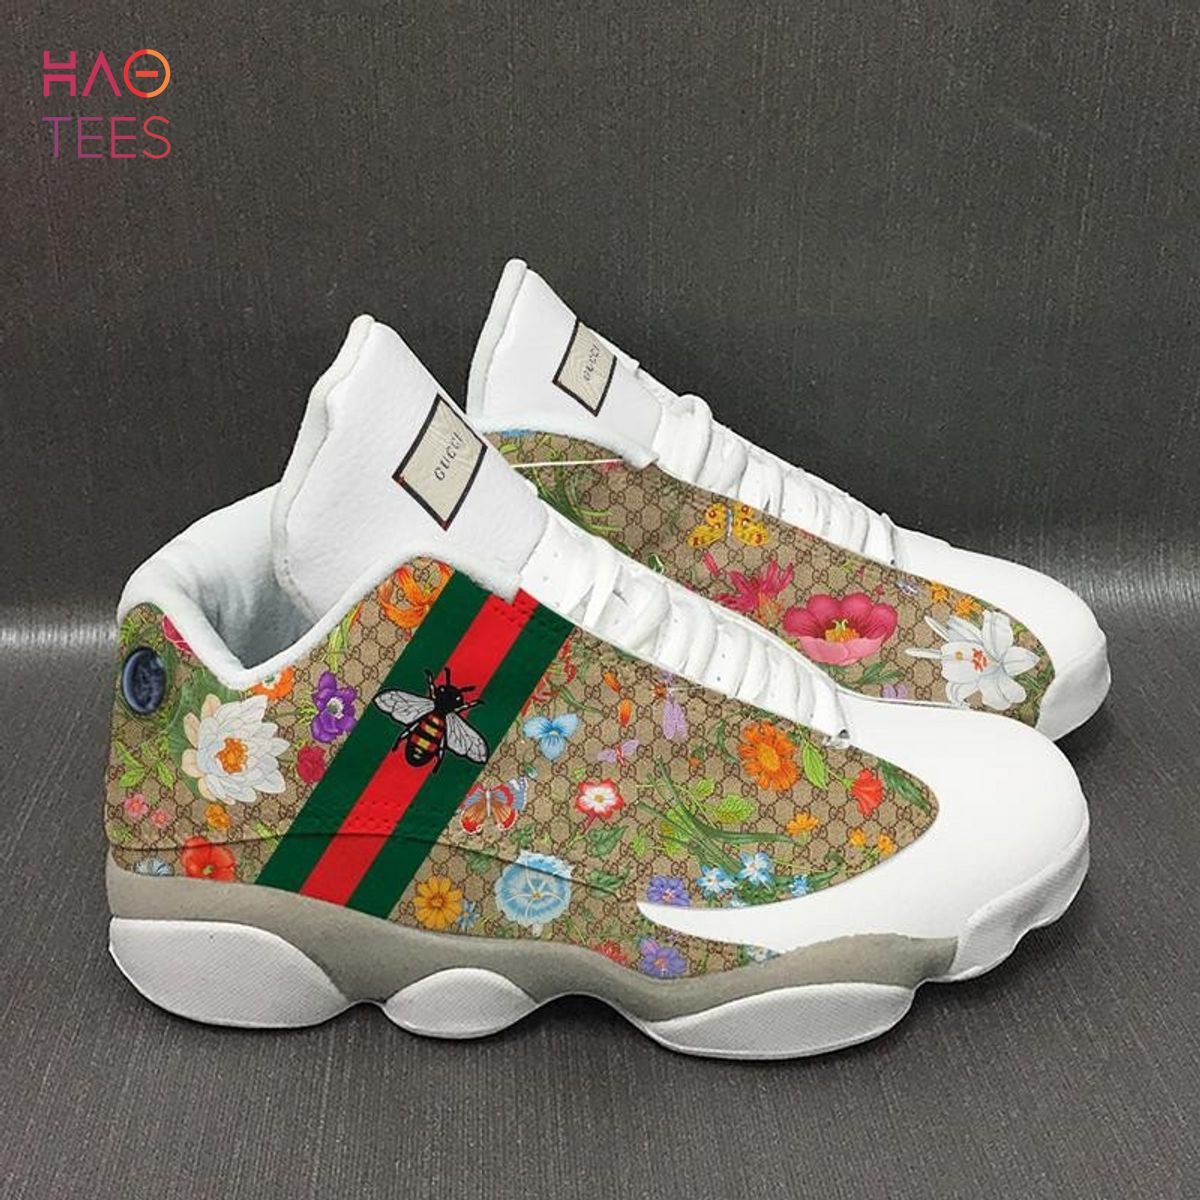 Air Jordan 13 Mix Gucci New Limited Edition Sneaker Shoes